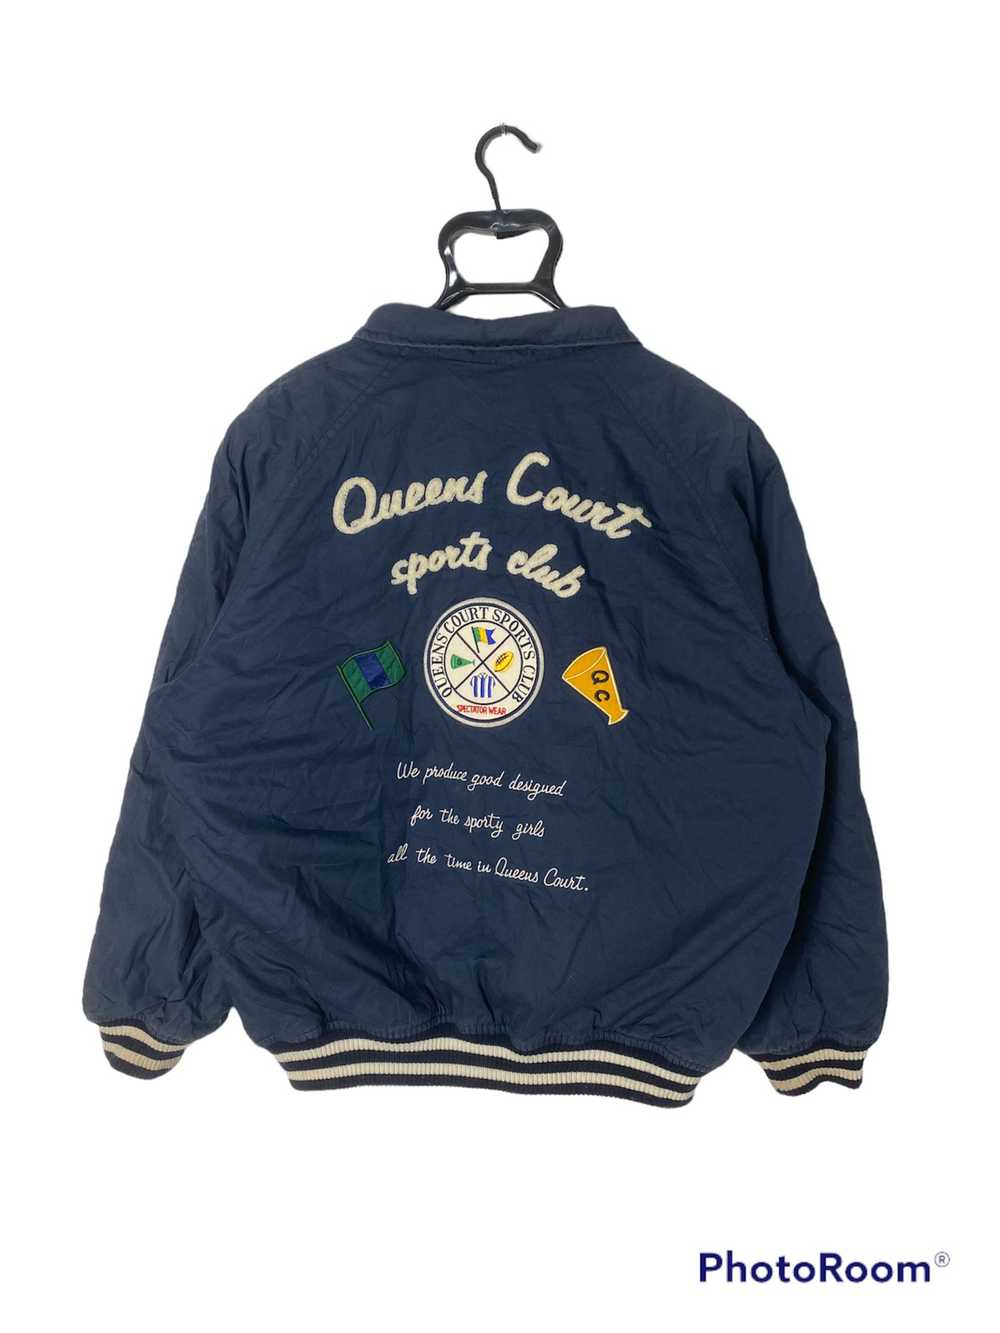 Japanese Brand - Queens Court Bomber Jacket - image 1